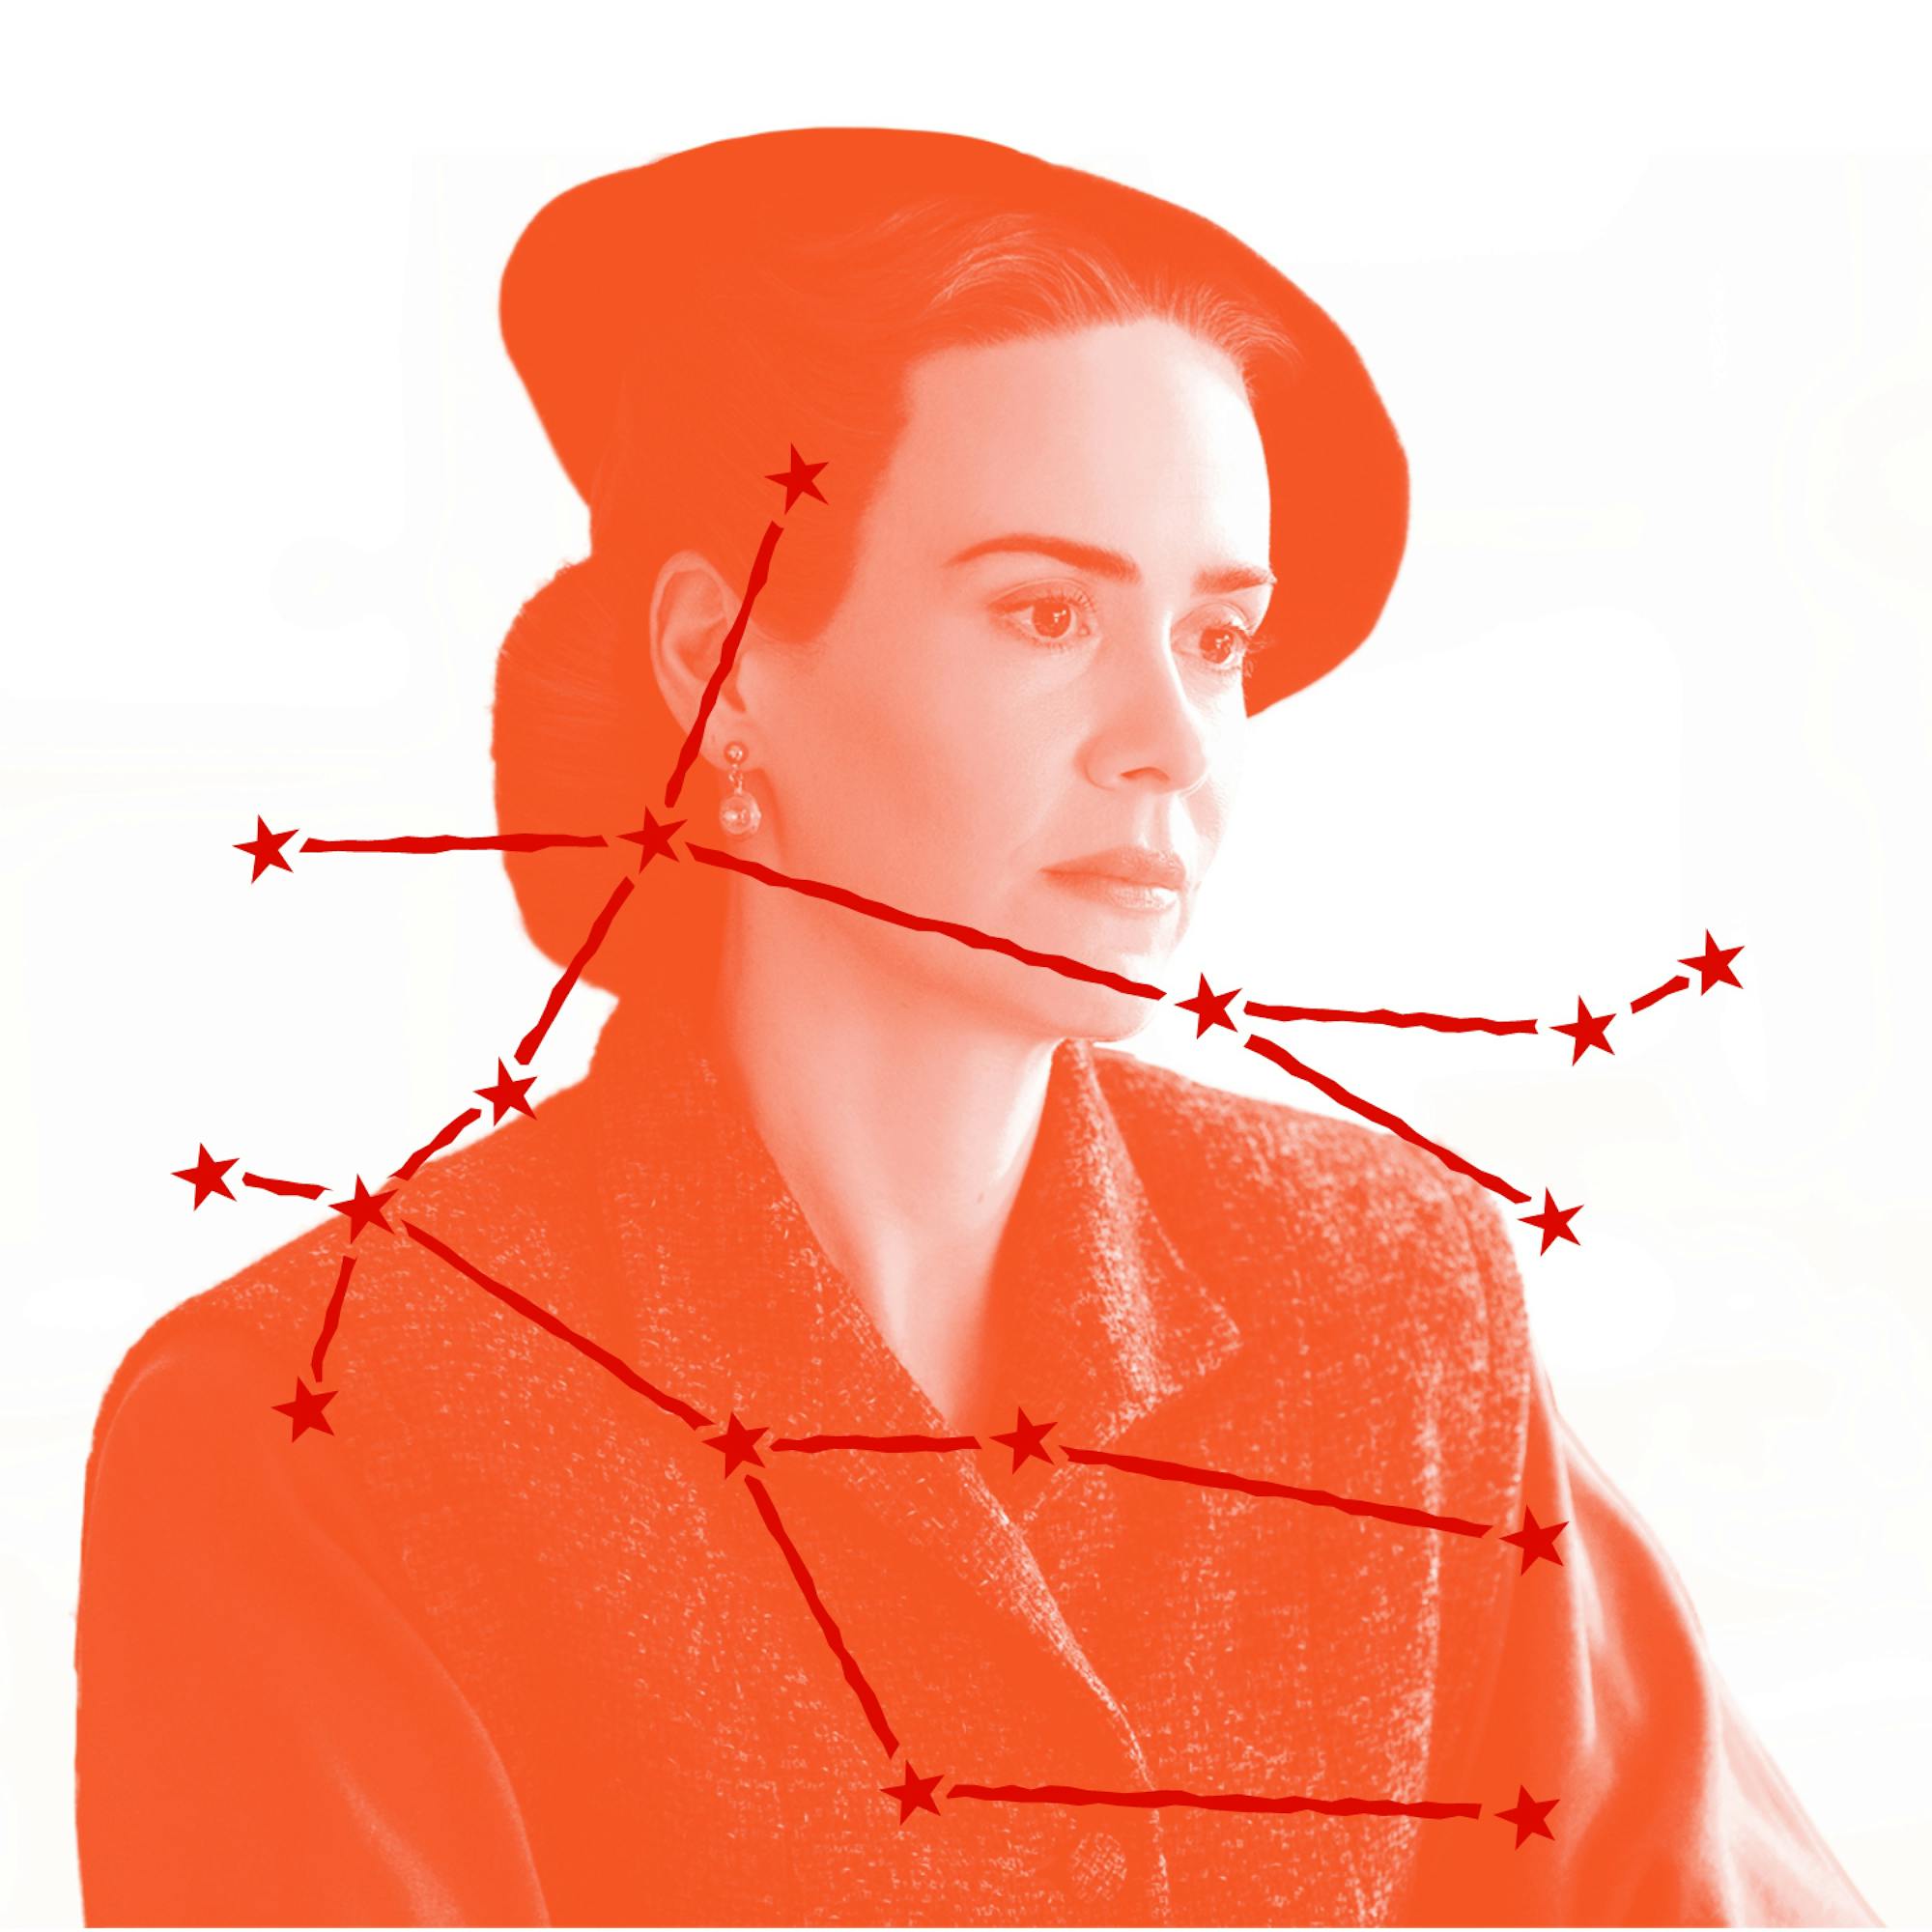 Mildred Ratched (played by Sarah Paulson) looks stern in a precisely chosen coat and hat ensemble in this still from Ratched. We know her star sign, but even we can’t tell you what she’s scheming. Over the image is an illustration of Mildred’s zodiac constellation.